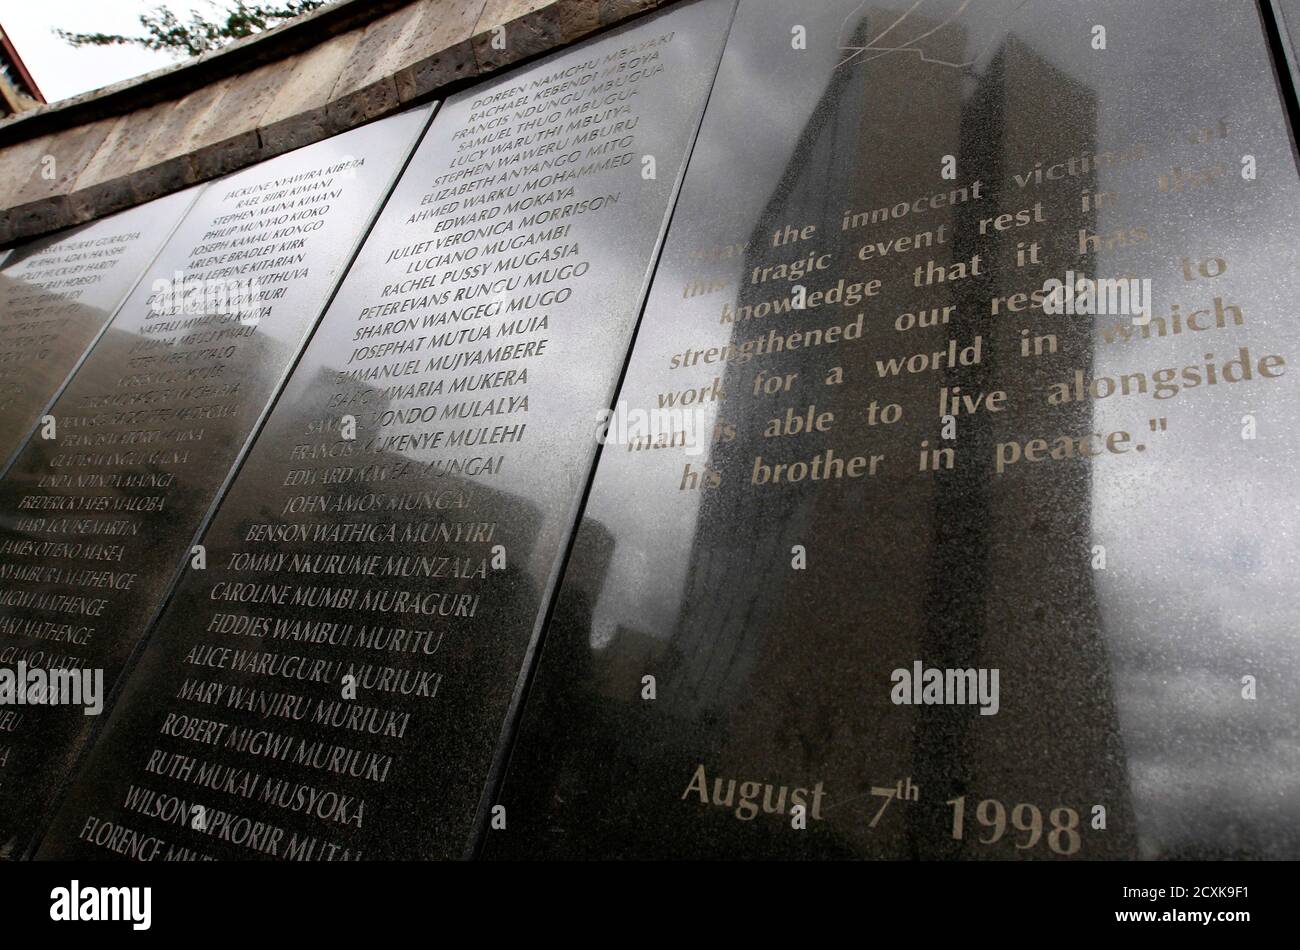 Names of the 248 people killed in the 1998 bombing of the U.S.embassy are seen on the memorial wall in Nairobi May 2, 2011. Al Qaeda leader Osama bin Laden was killed in a U.S. helicopter raid on a mansion near the Pakistani capital Islamabad early on Monday, officials said, ending a nearly 10-year worldwide hunt for the mastermind of the Sept. 11 attacks. The Cooperative Bank building, which was also damaged in the August 7, 1998 truck bomb attacks aimed at U.S. embassies in Kenya, is reflected on the memorial wall.  REUTERS/Thomas Mukoya (KENYA - Tags: CIVIL UNREST CONFLICT POLITICS) Stock Photo